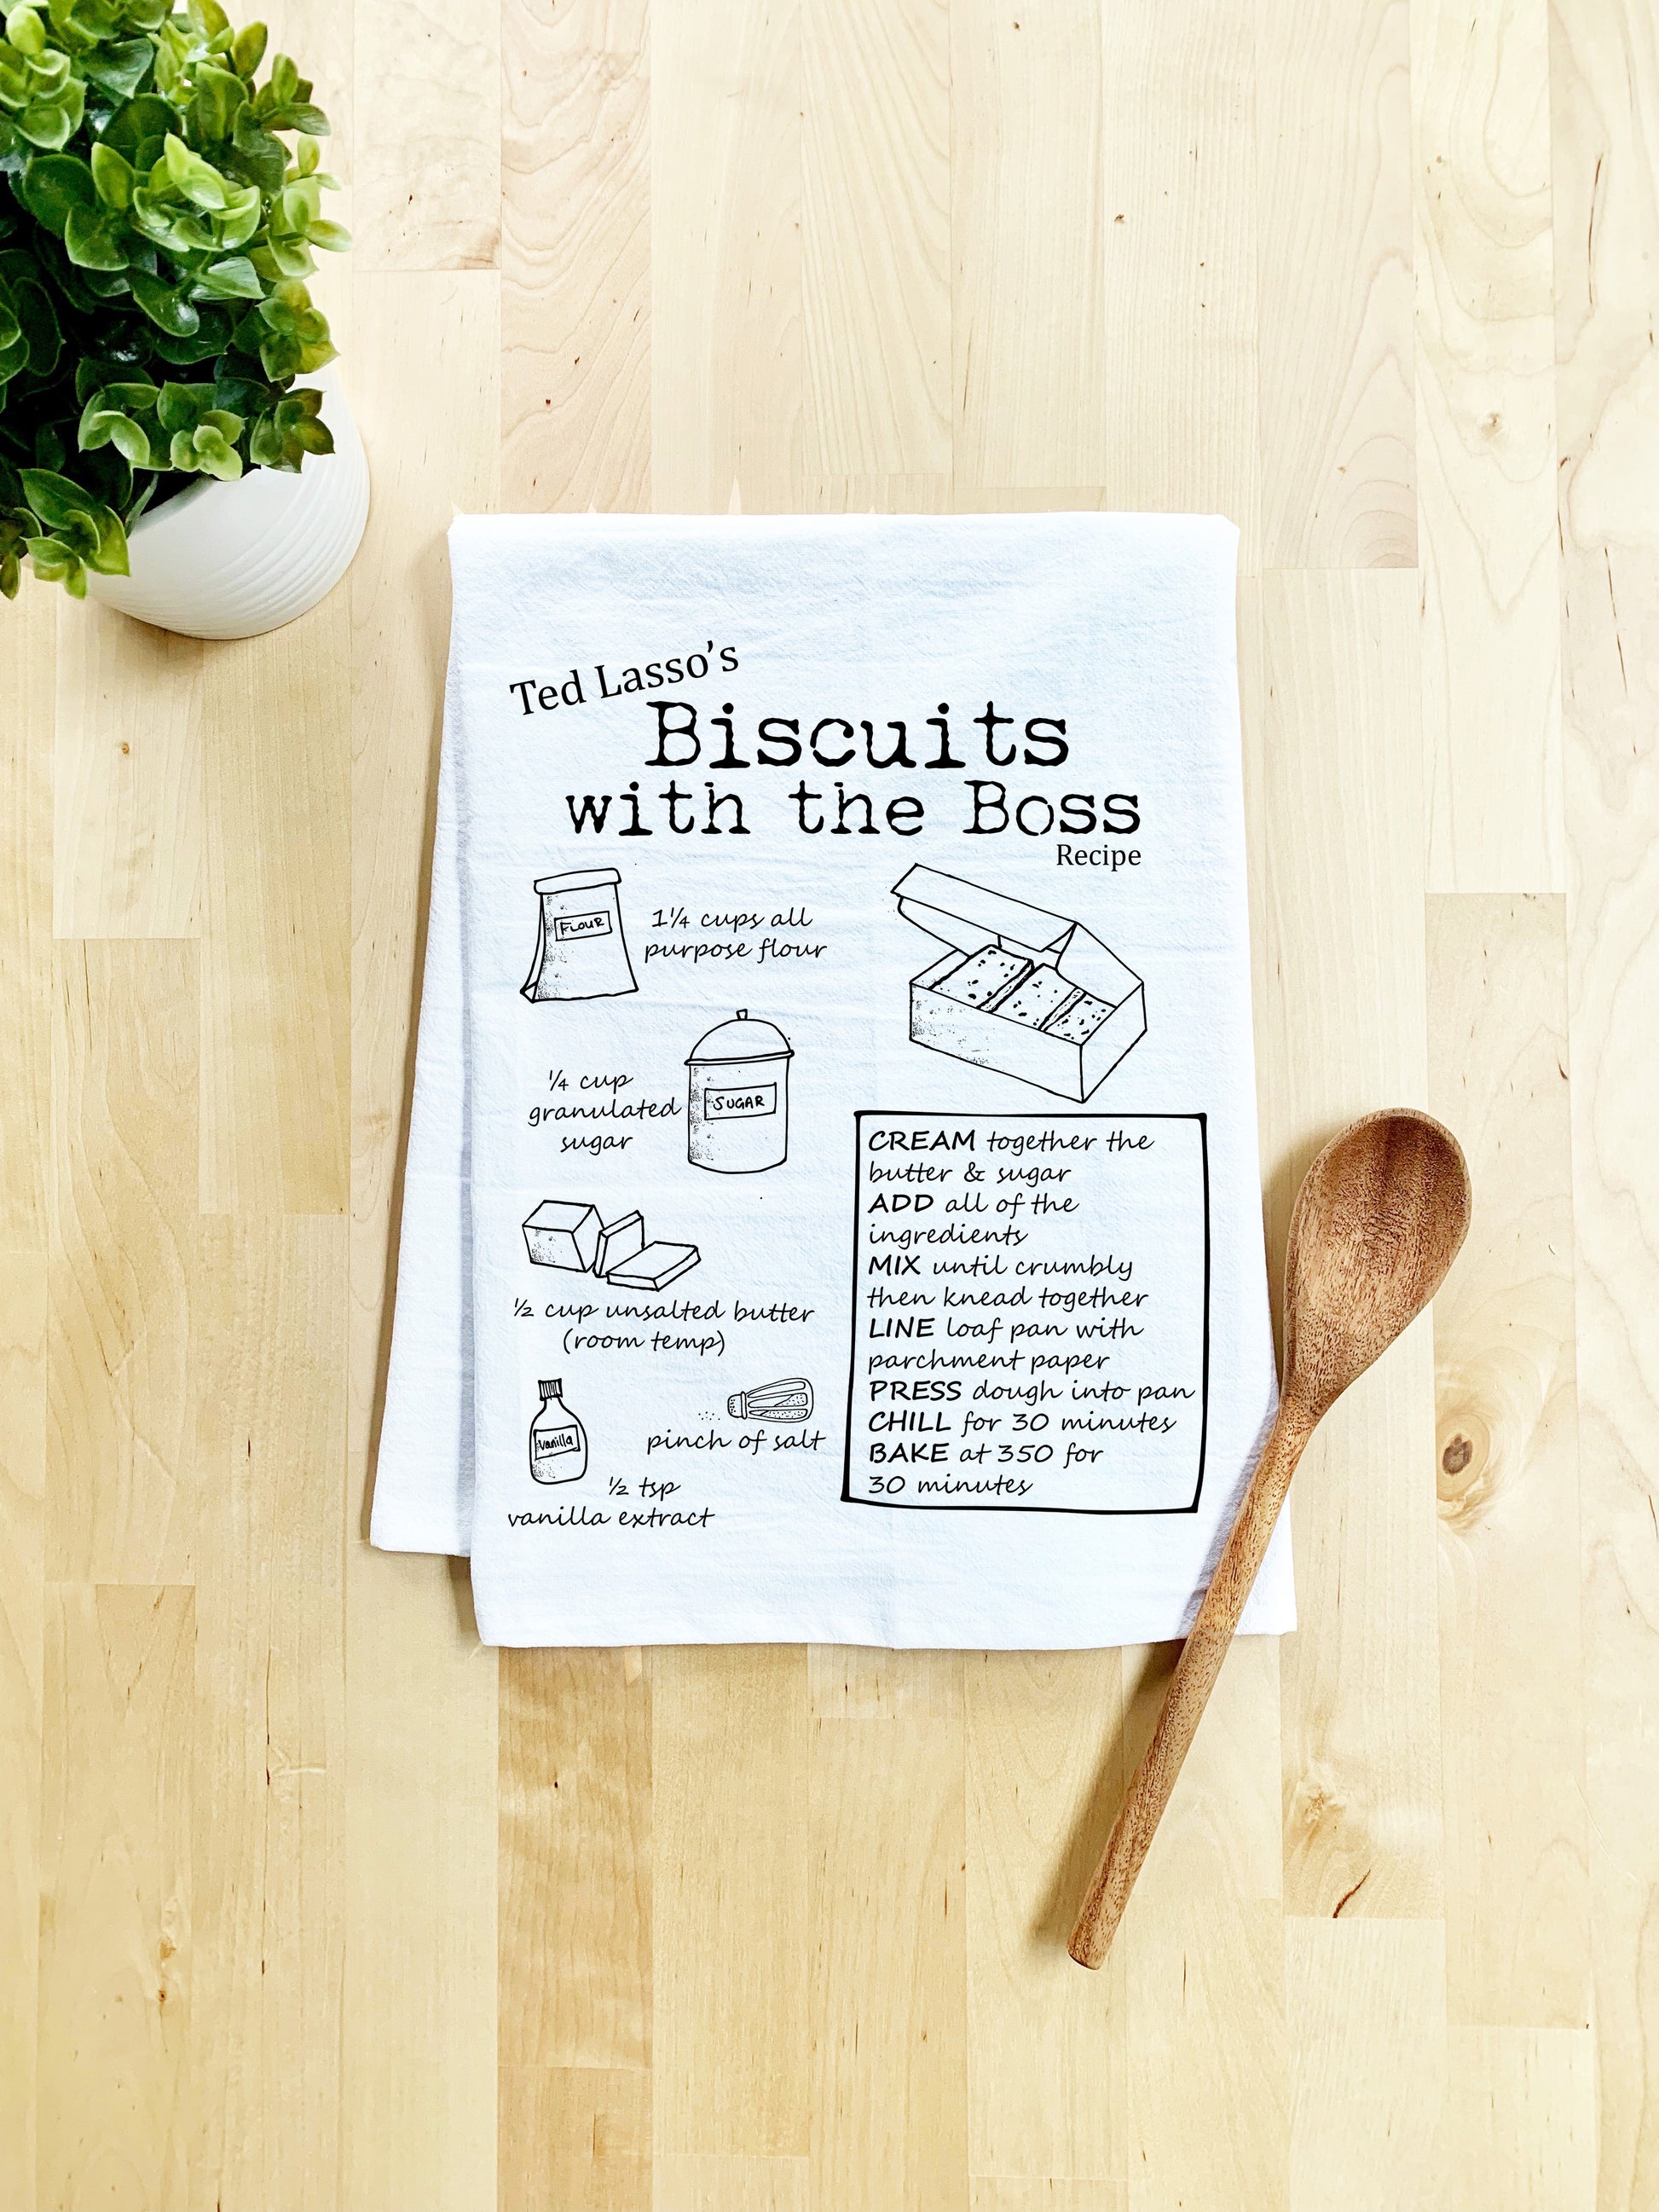 Biscuits With The Boss (Ted Lasso) Dish Towel - White Or Gray - MoonlightMakers